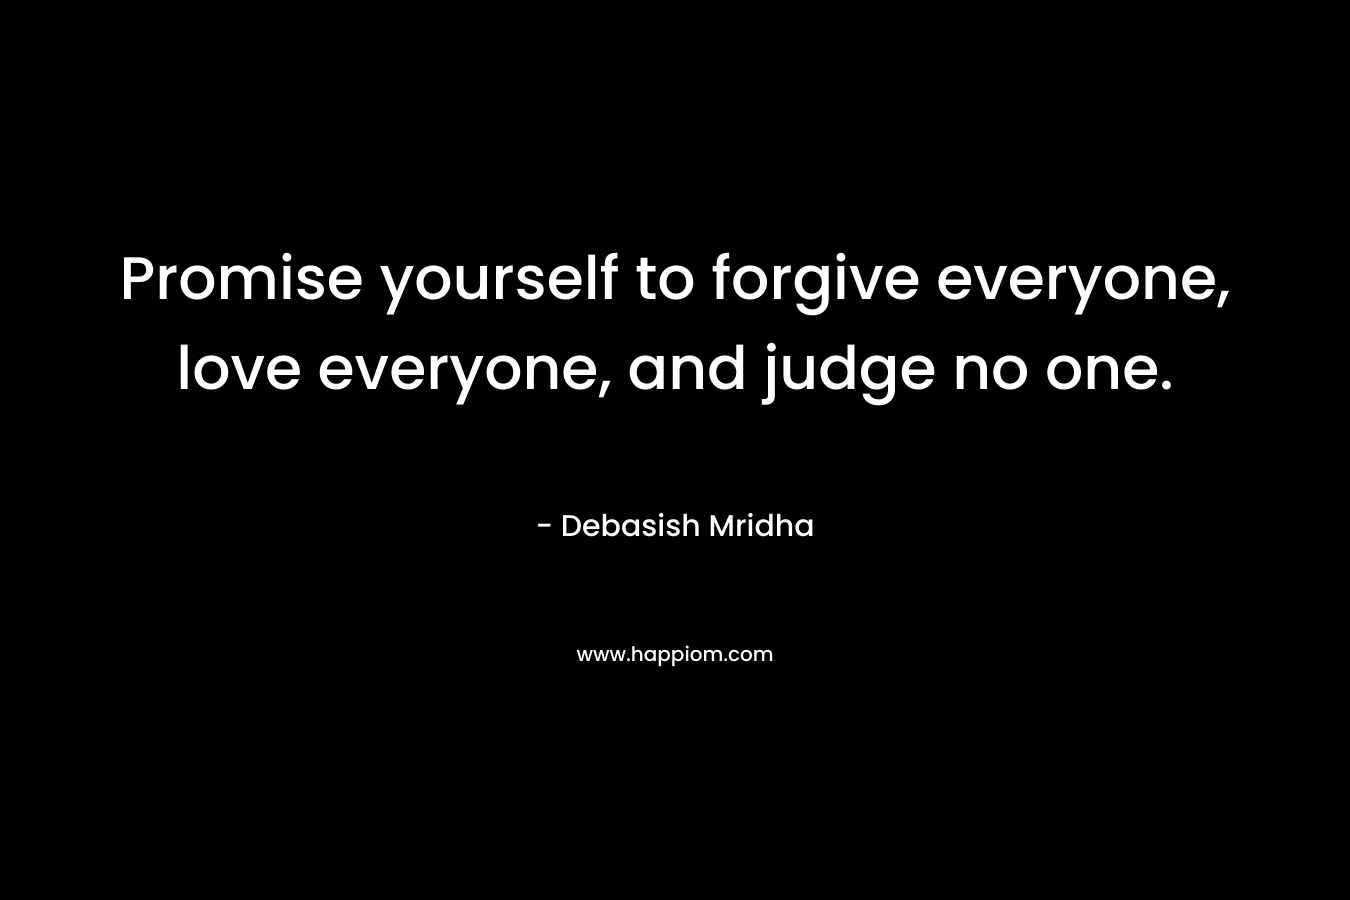 Promise yourself to forgive everyone, love everyone, and judge no one.